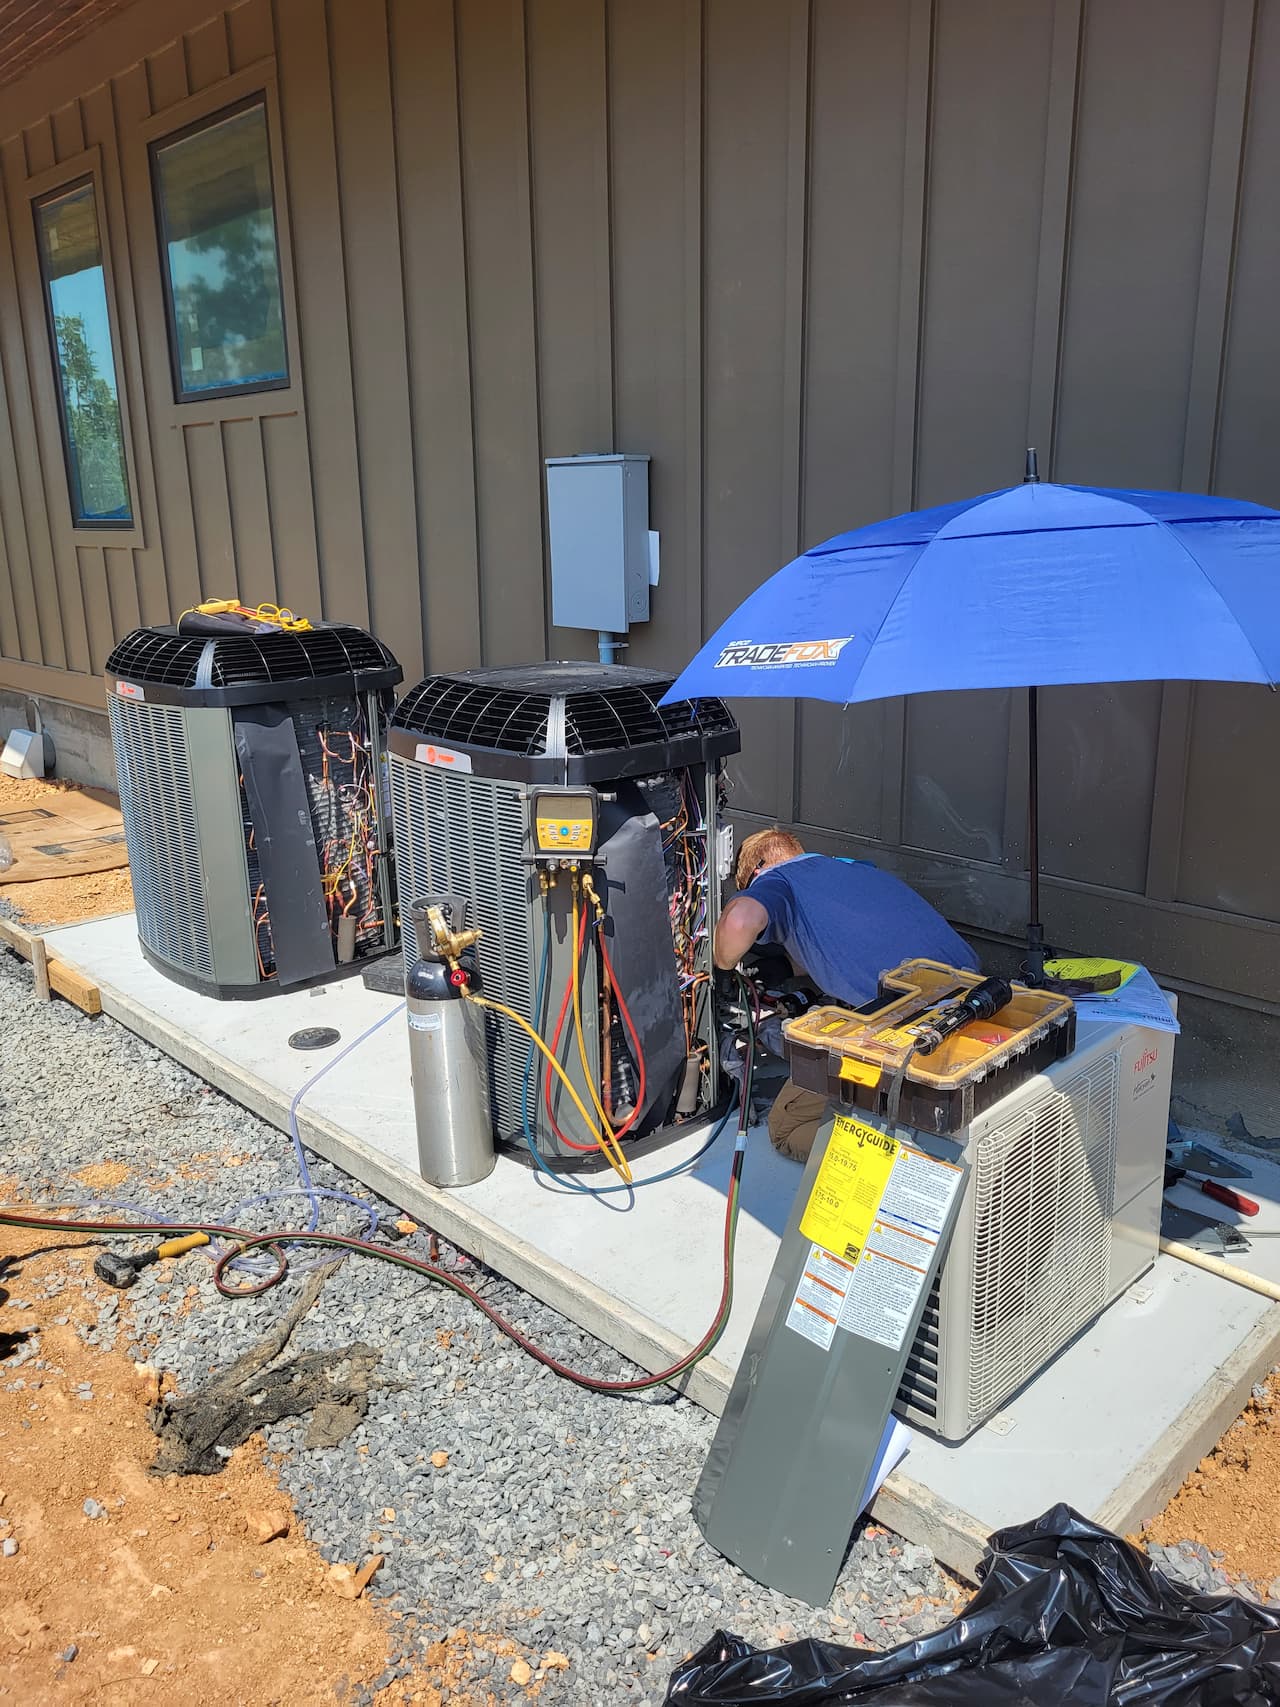 Commercial Air Conditioning Repair Near Me, Bellevue, Bellemeade, Brentwood, Madison, Donelson, Antioch, Hermitage, East Nashville, South Nashville, North Nashville, West Nashville, Waverly And Lobelville